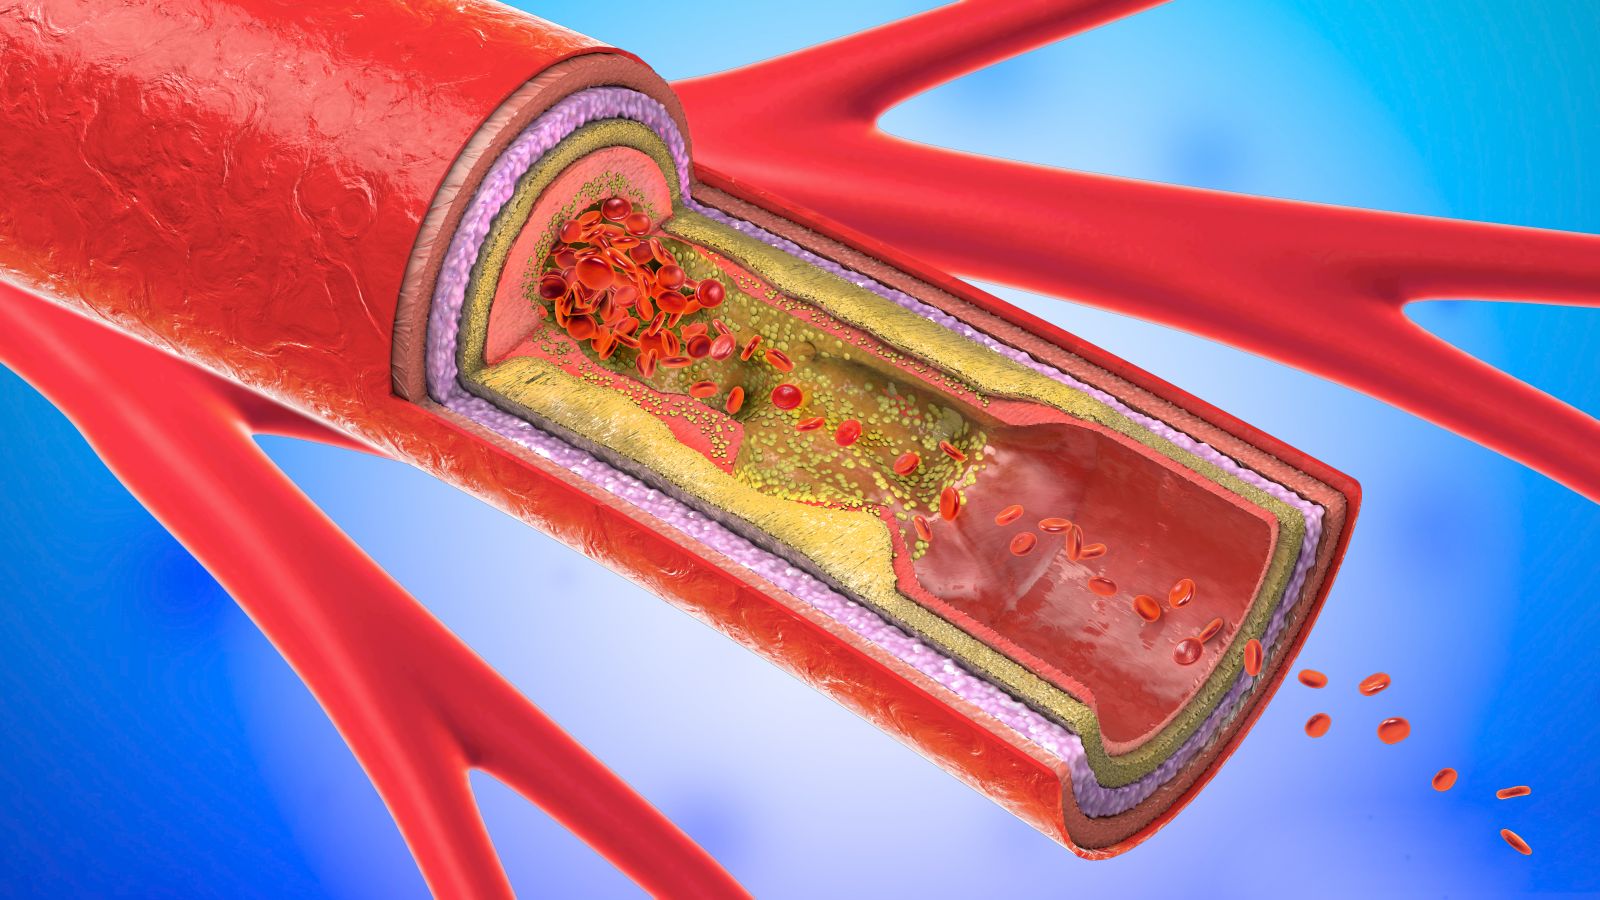 Know about carotid artery location & carotid artery testing with ACCESS HEALTH CARE PHYSICIANS, LLC in Florida.